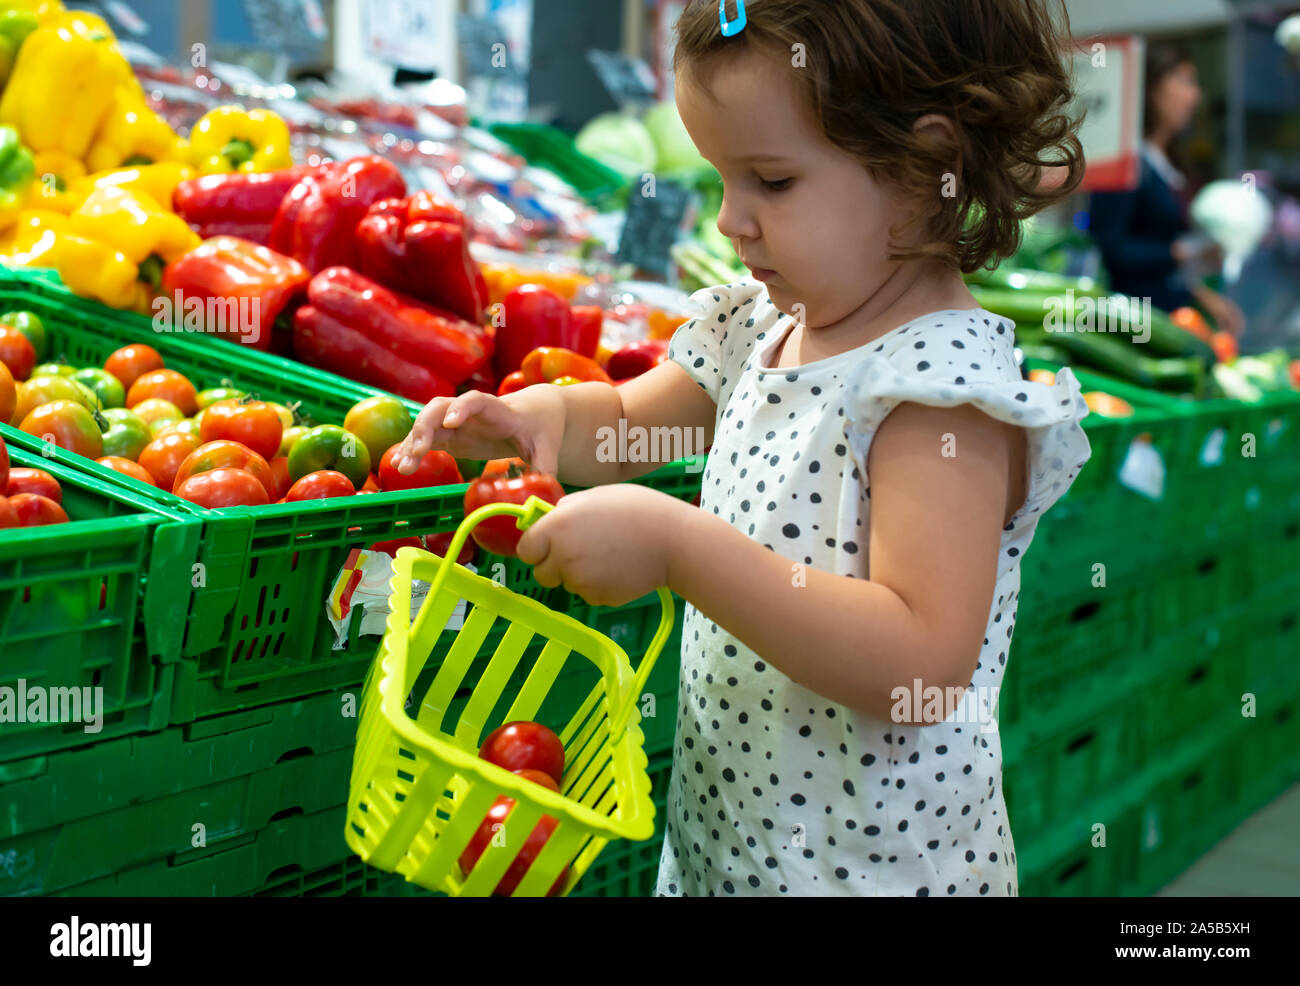 Little girl buying tomatoes in supermarket. Child hold small basket in supermarket and select vegetables. Concept for healthy eating for children. Stock Photo